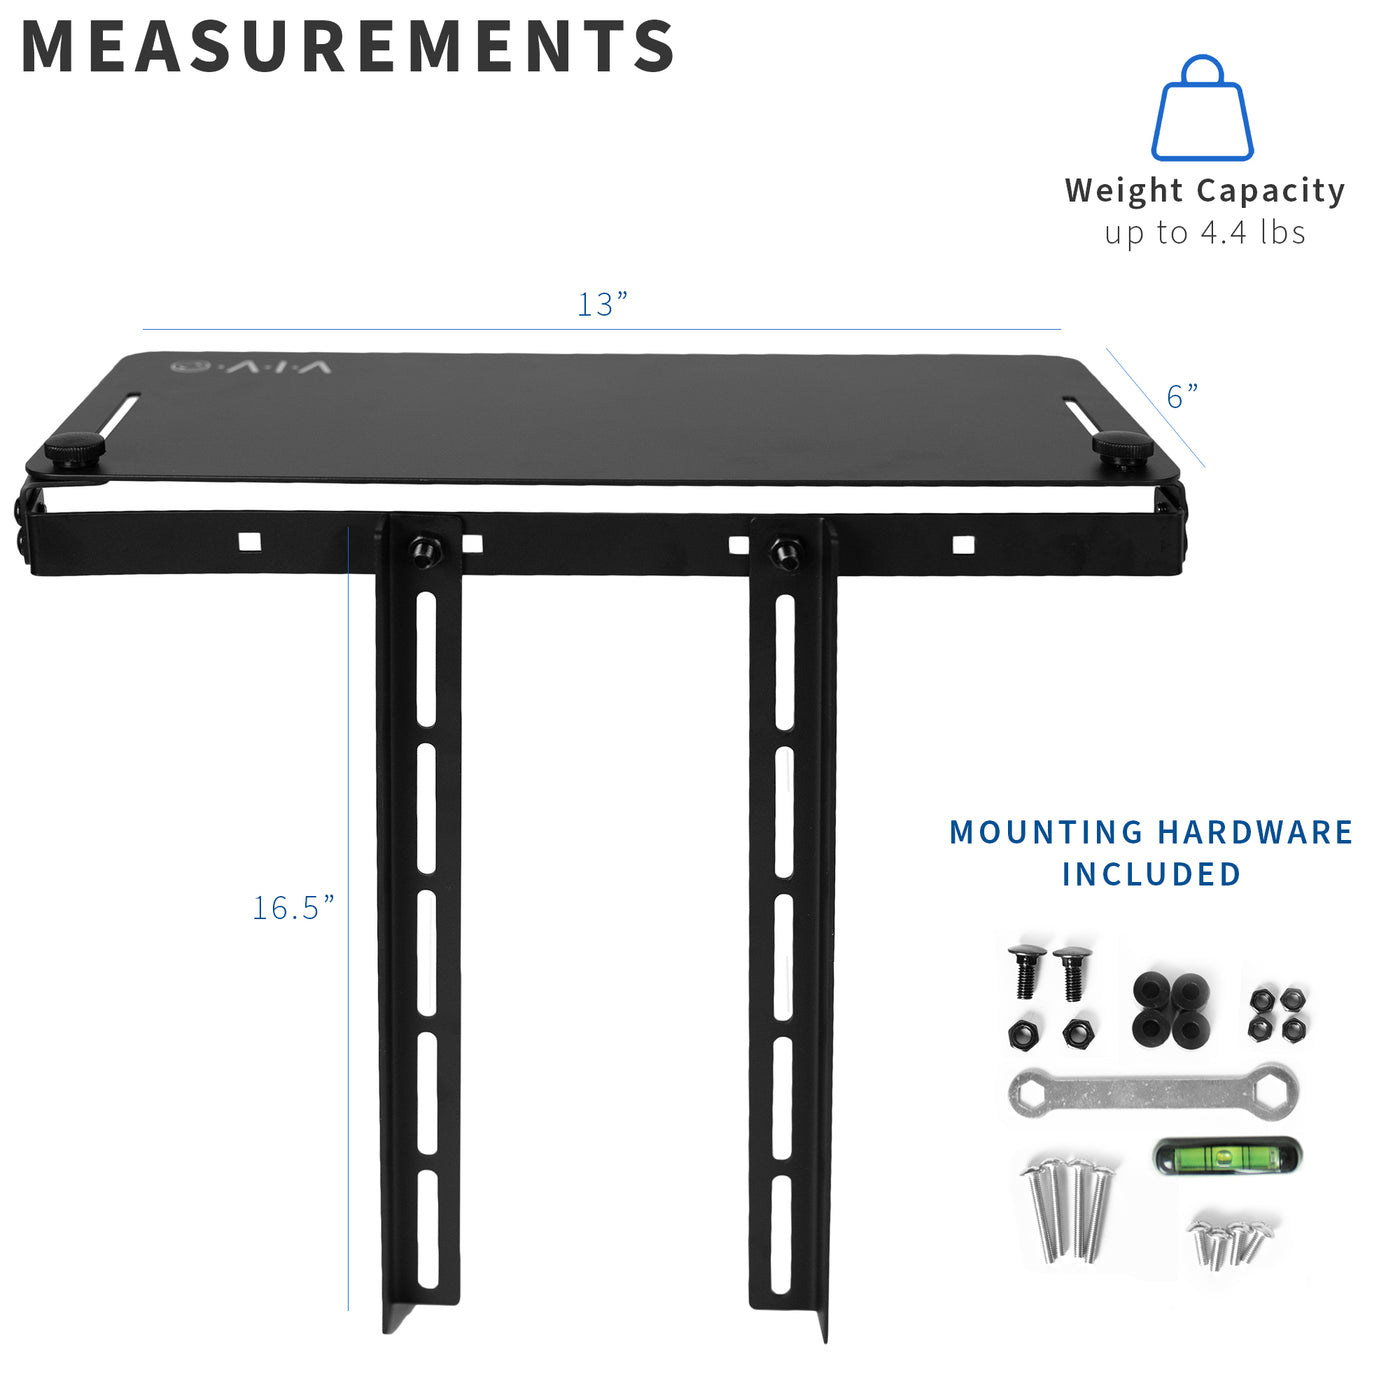 Heavy-duty VESA monitor desk shelf with solid steel mount brackets with over or under desk application and hardware included.